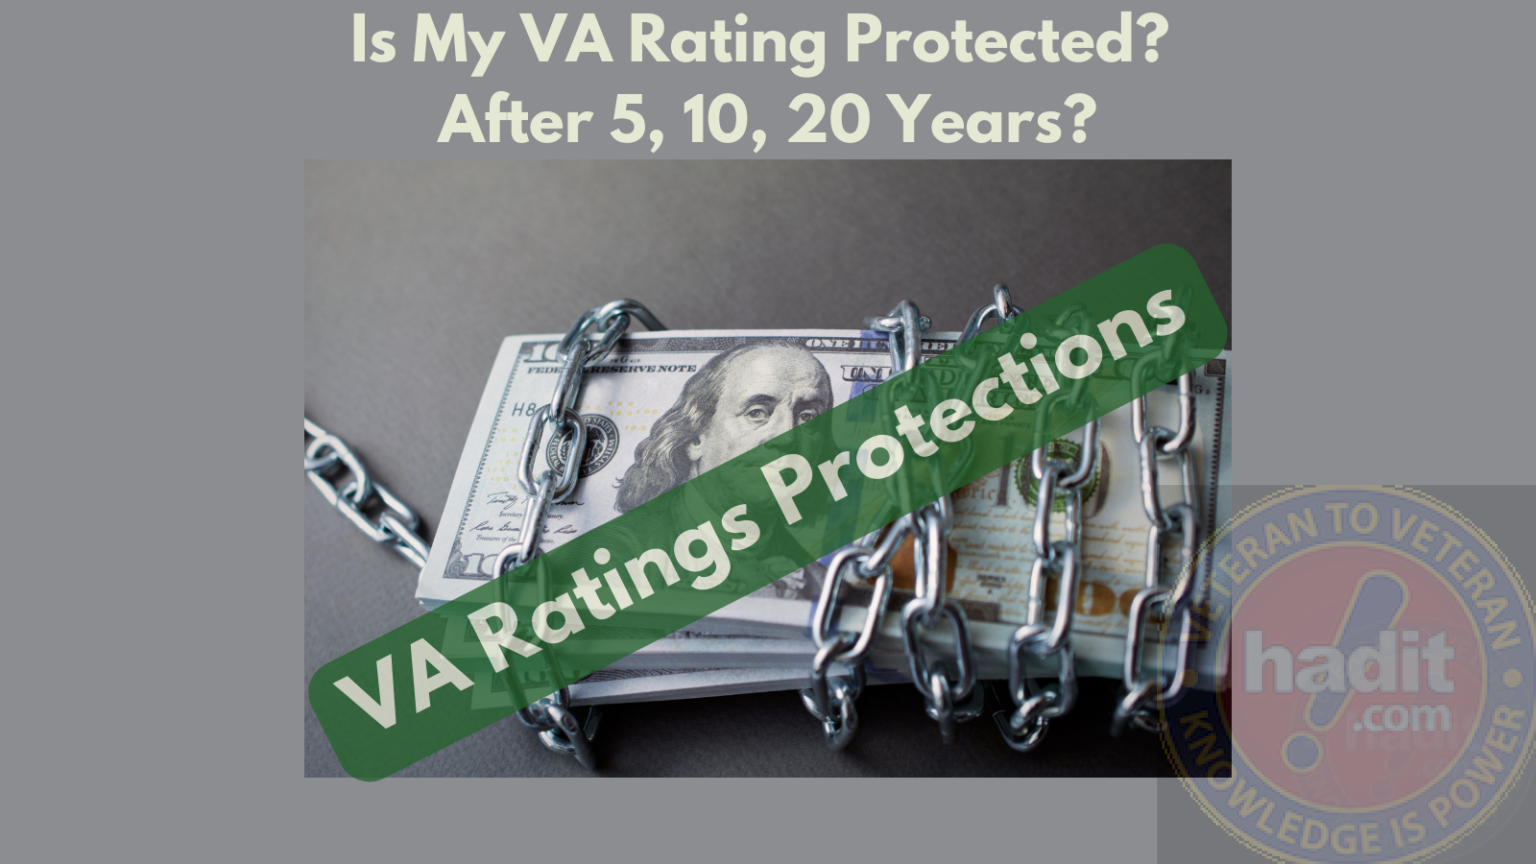 An image displaying a stack of US dollar bills locked with a chain and padlock. Overlaid text reads "Is My VA Rating Protected? After 5, 10, 20 Years? VA Ratings Protections" with a logo and the words "HadIt.com Veteran to Veteran Knowledge is Power" in the lower right corner.